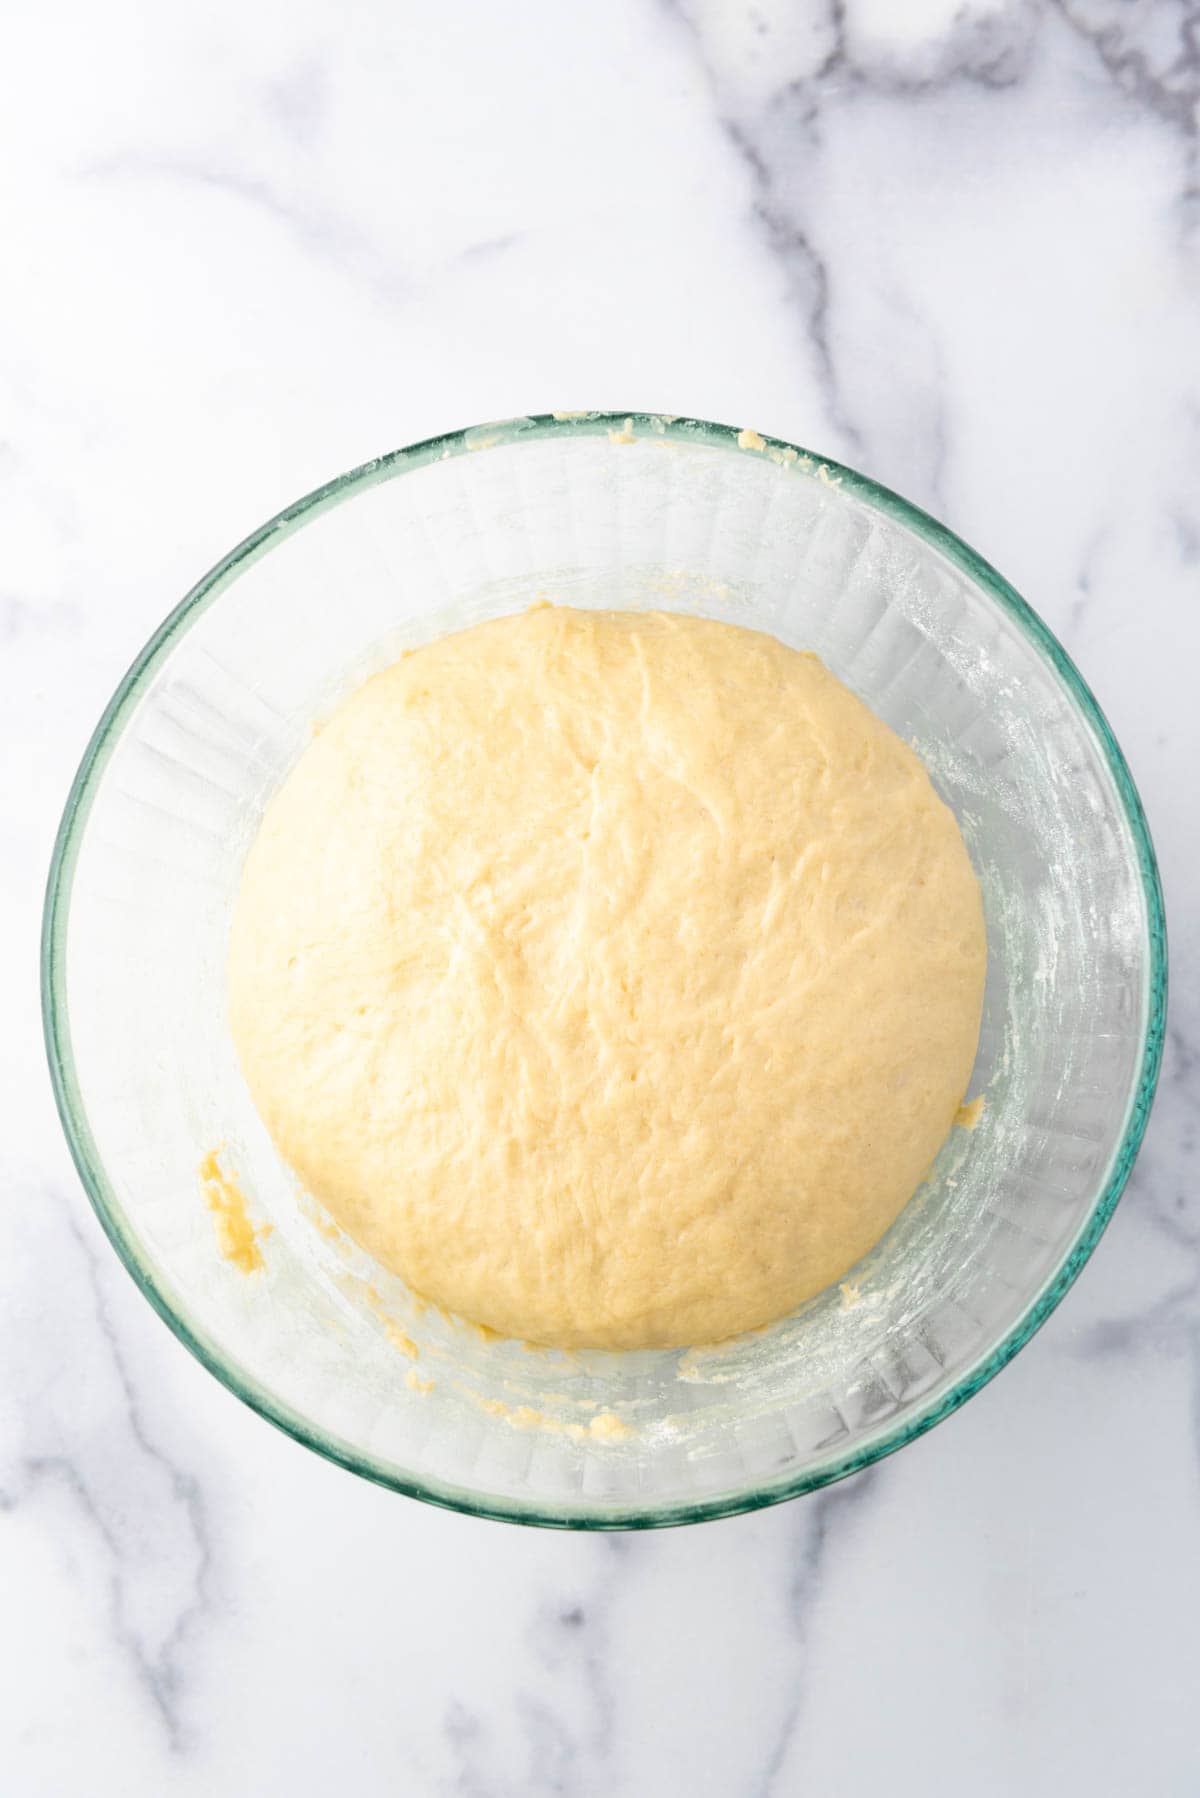 Cinnamon roll dough that has doubled in size in a bowl.